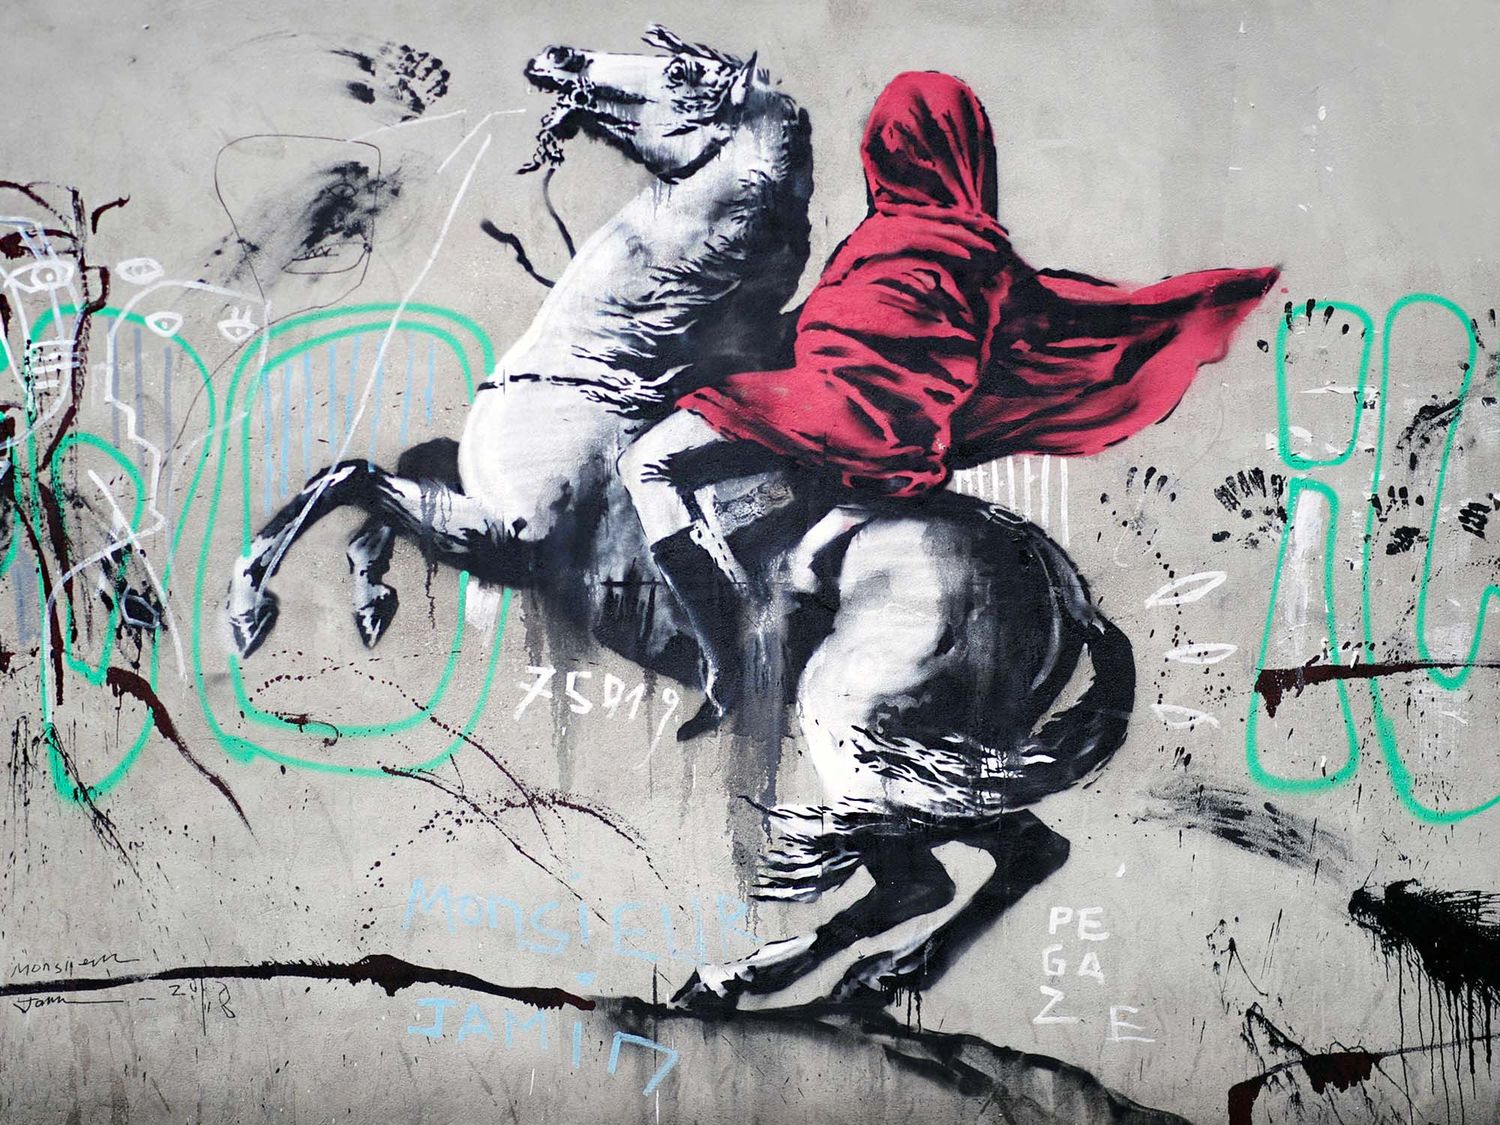 Although he is not the pioneer of stencil art, Banksy is undoubtedly the world's best-known stencil artist who uses this technique and the man who brought it to the general public (©Benoit Tessier).